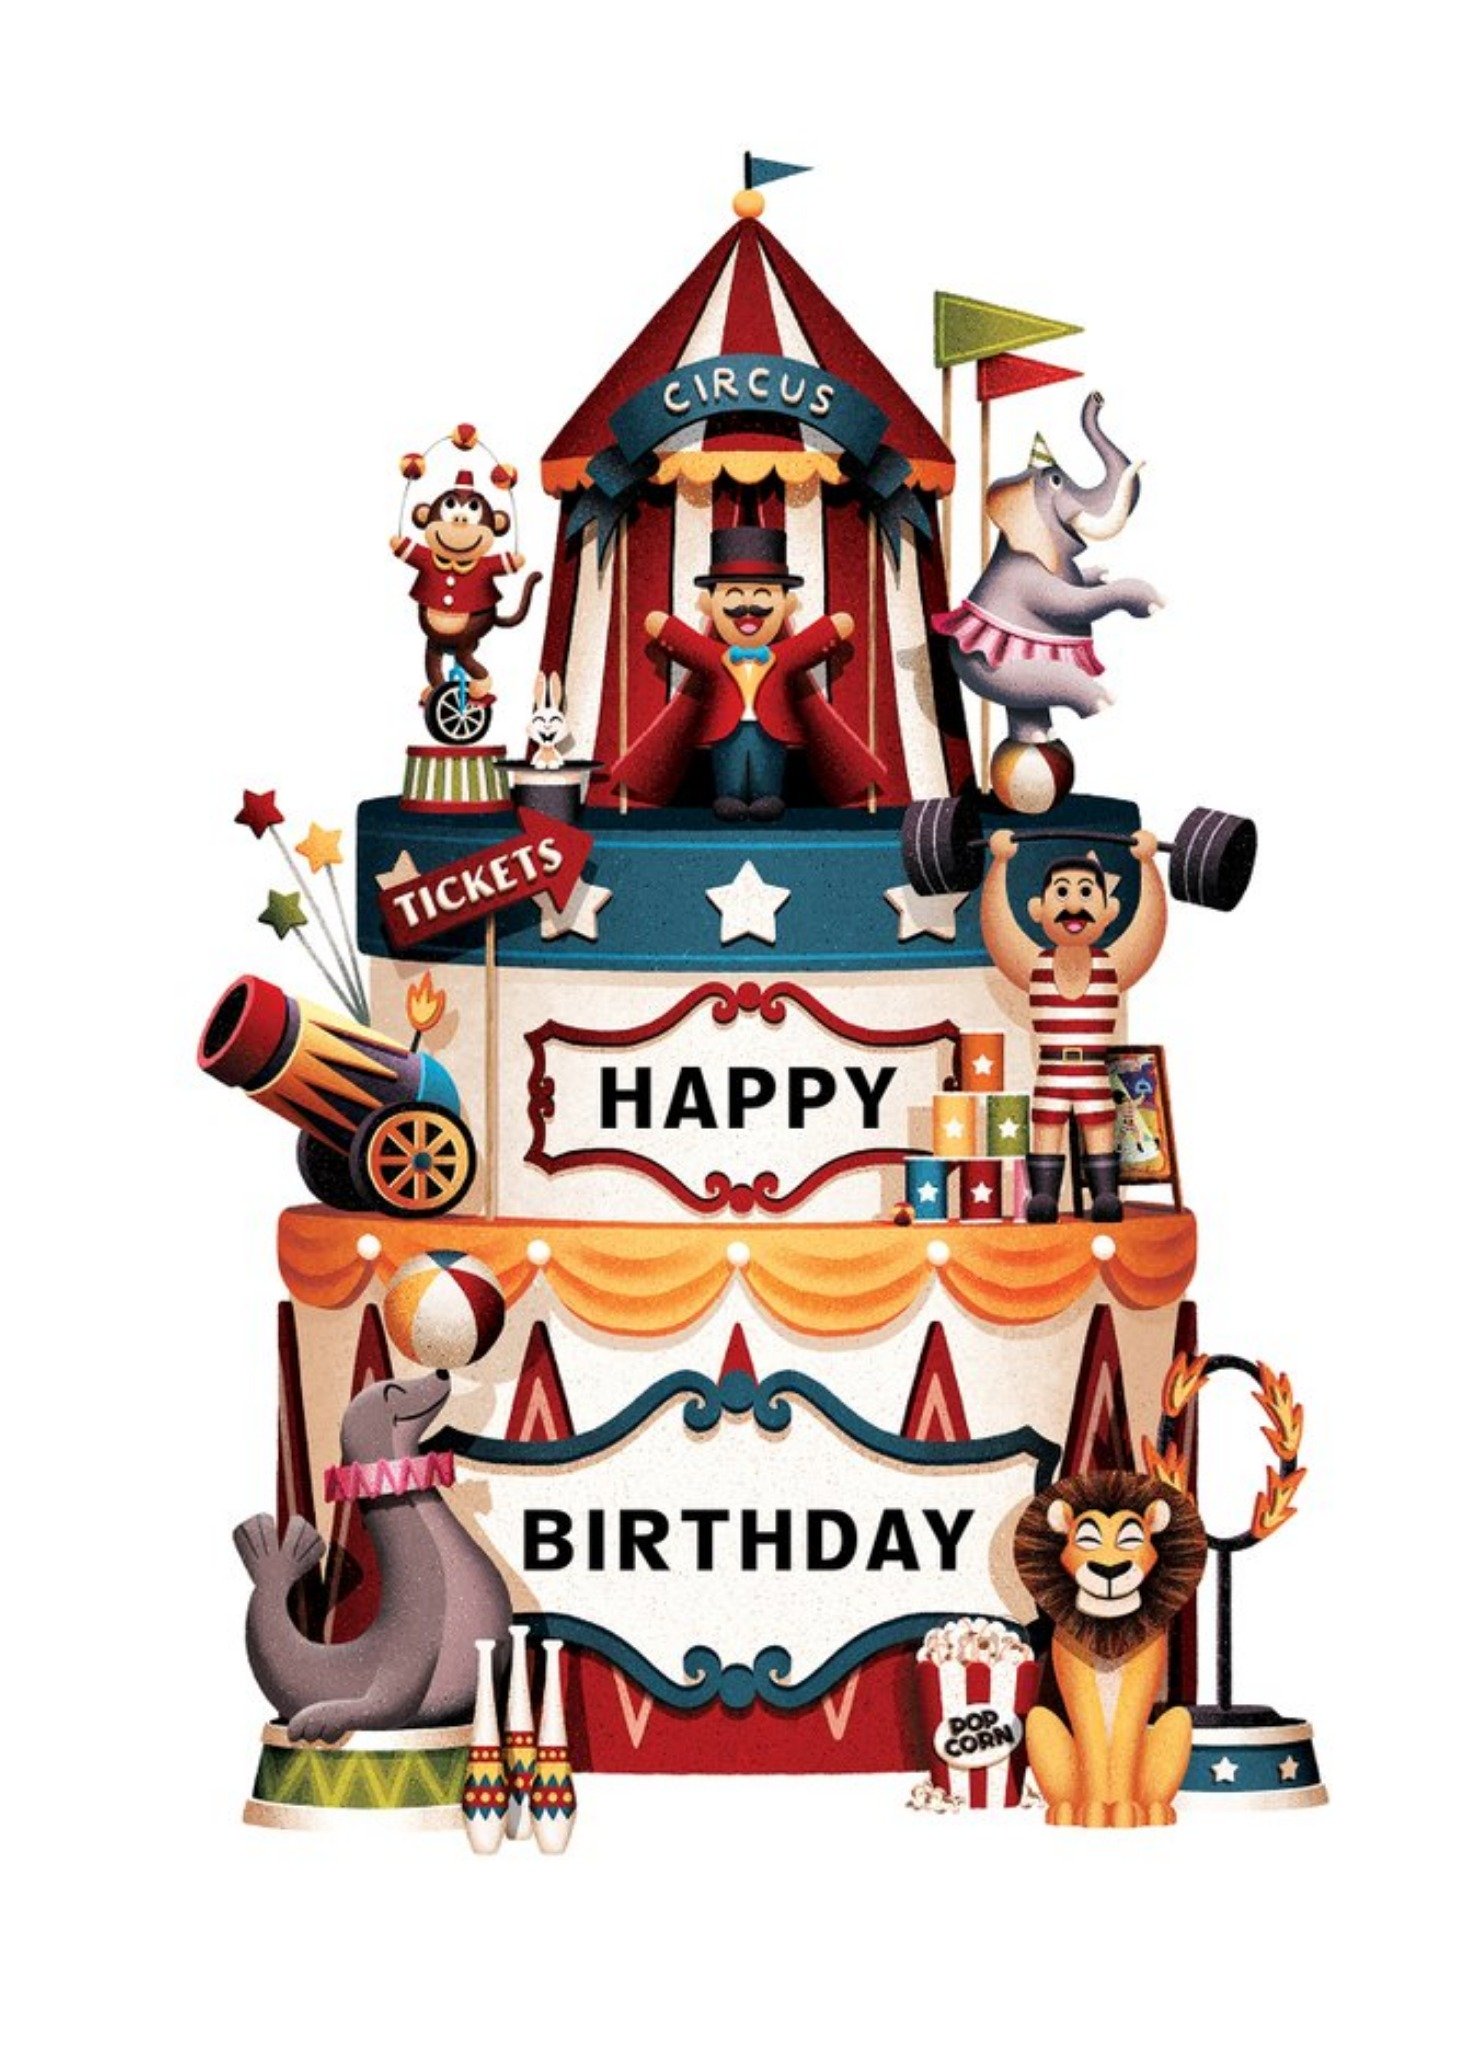 Moonpig Folio Illustrated Circus Tent And Performers. Happy Birthday Card Ecard